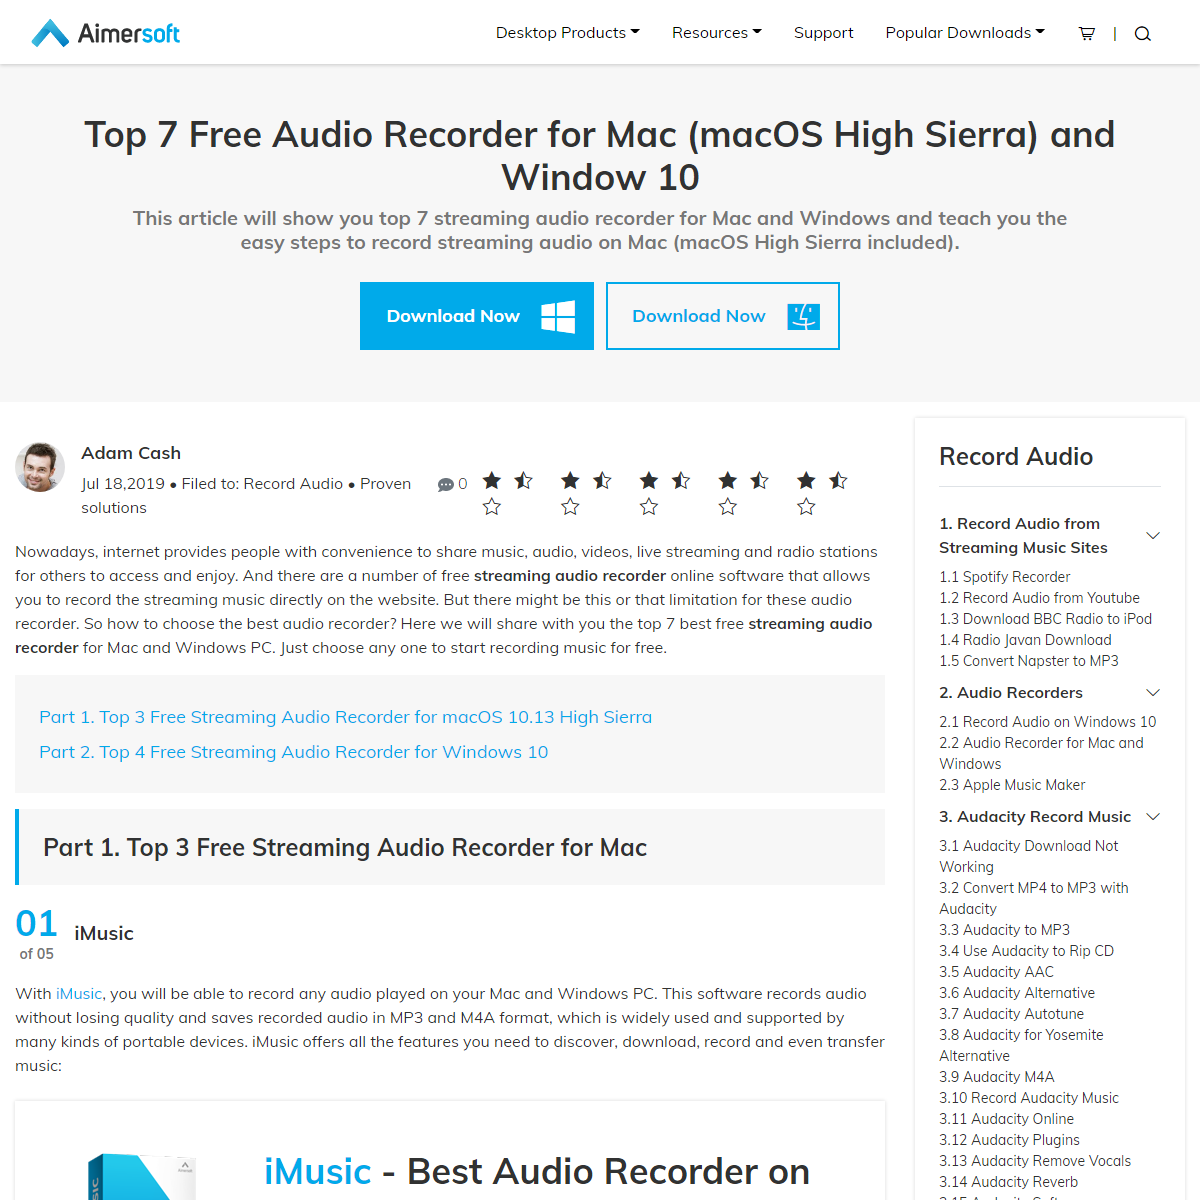 A complete backup of https://www.aimersoft.com/record-music/audio-recorder-for-mac-and-windows.html